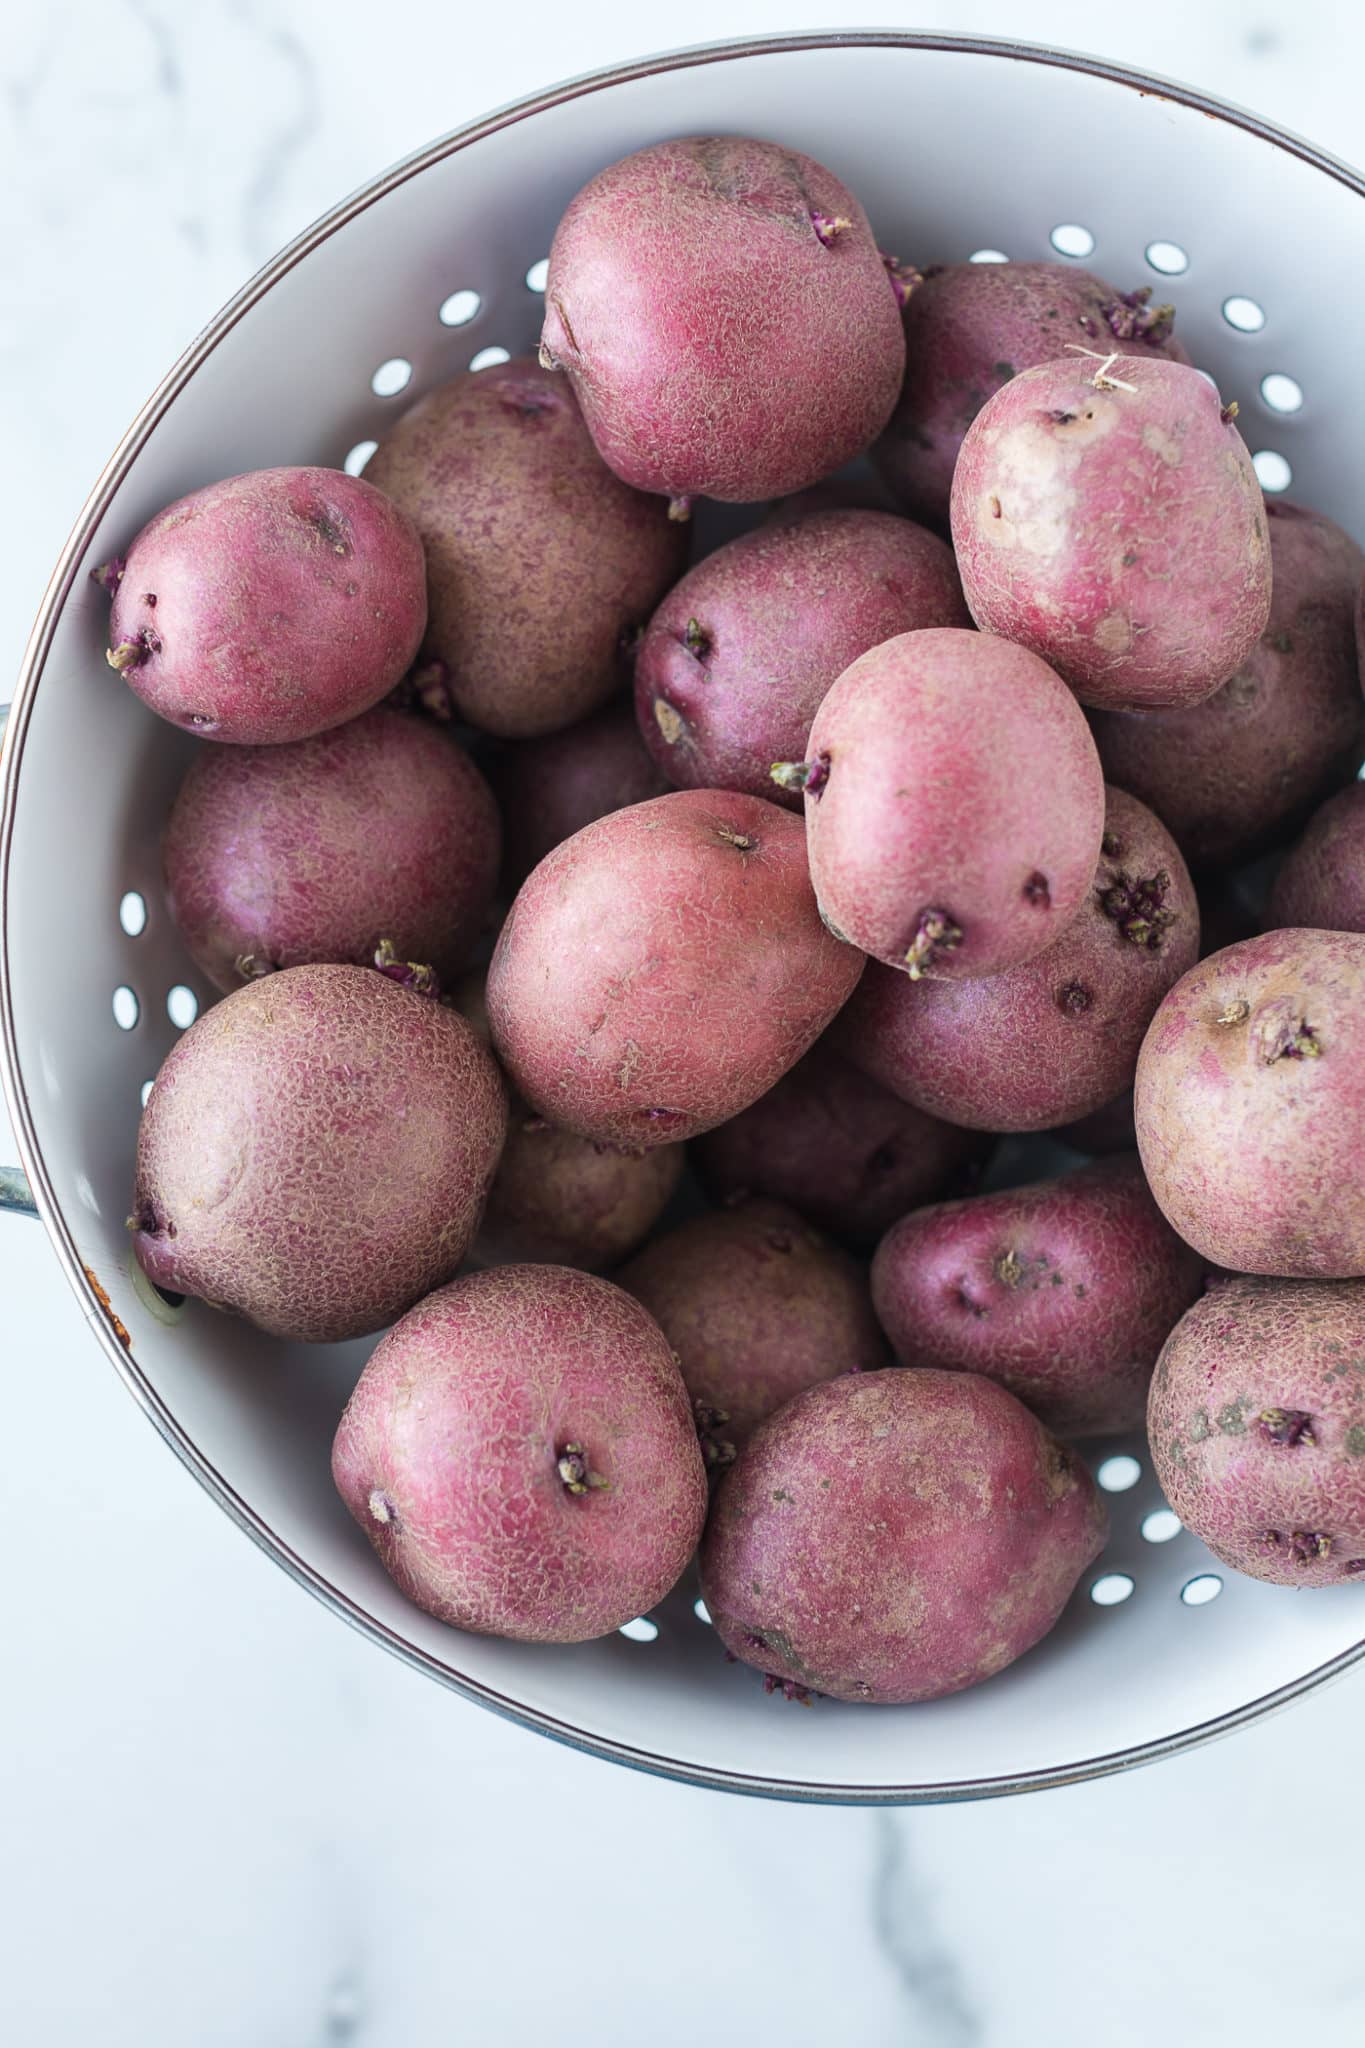 uncooked red potatoes in a colander